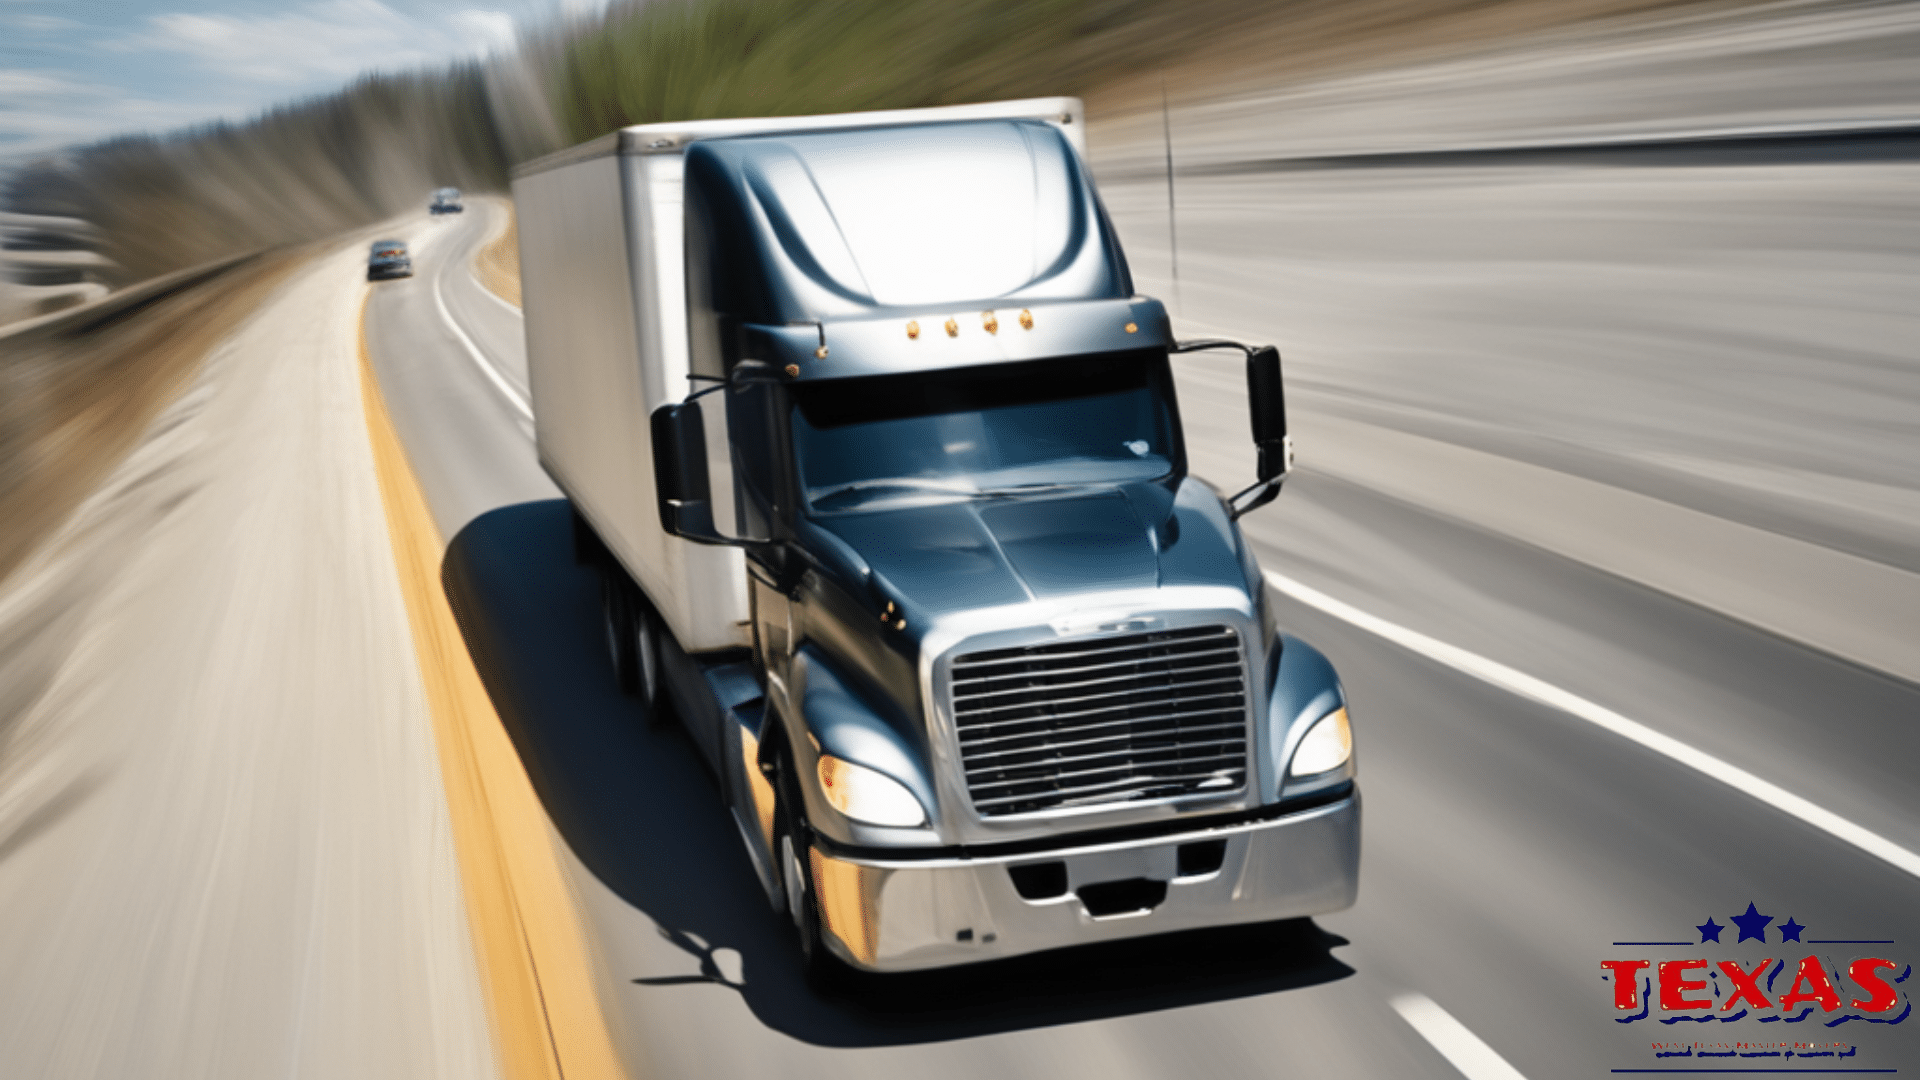 Long Distance Movers Companies in Lubbock Texas